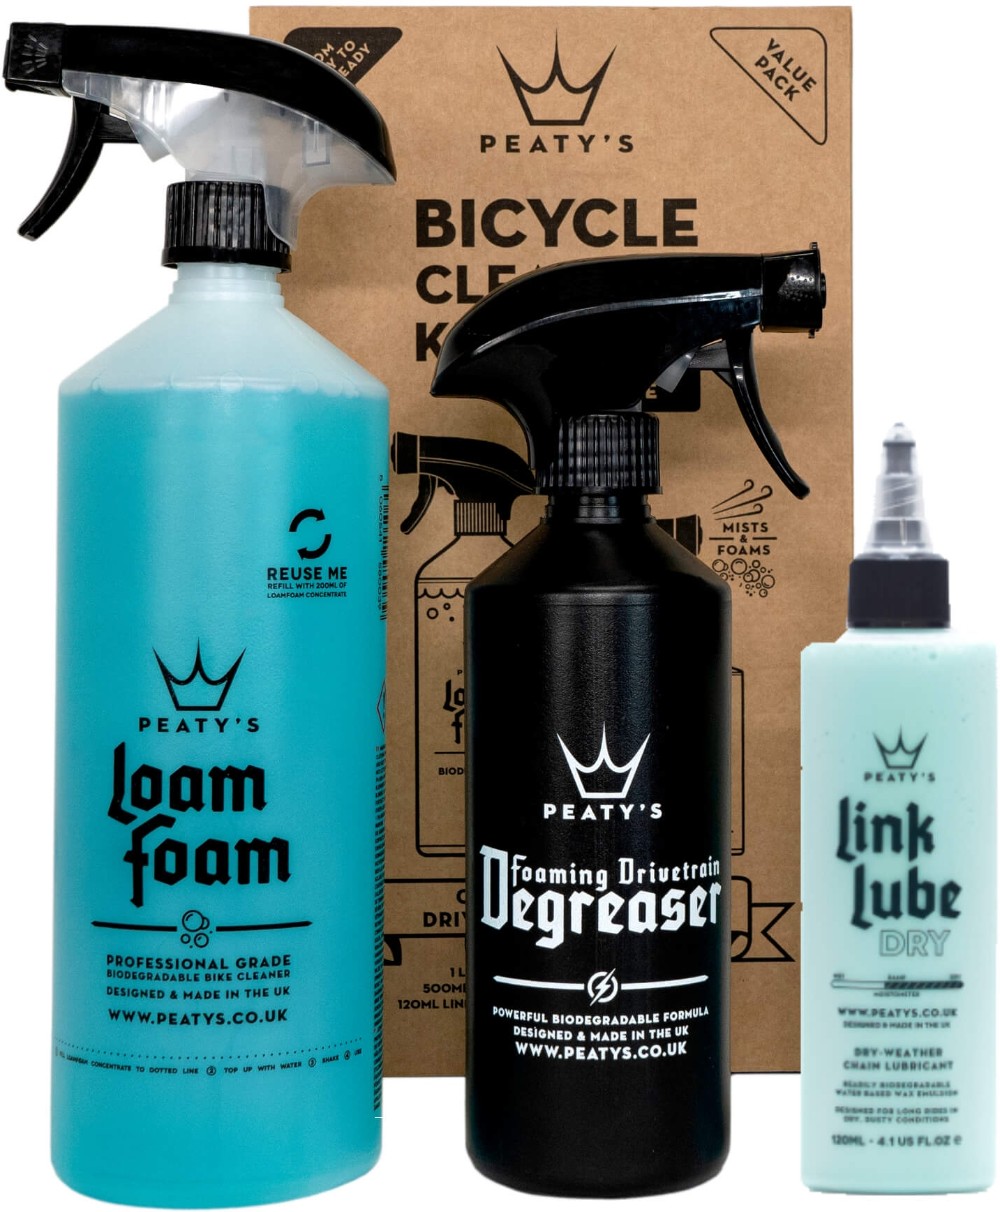 Bicycle Cleaning Kit - Wash Degrease Lubricate Dry image 0